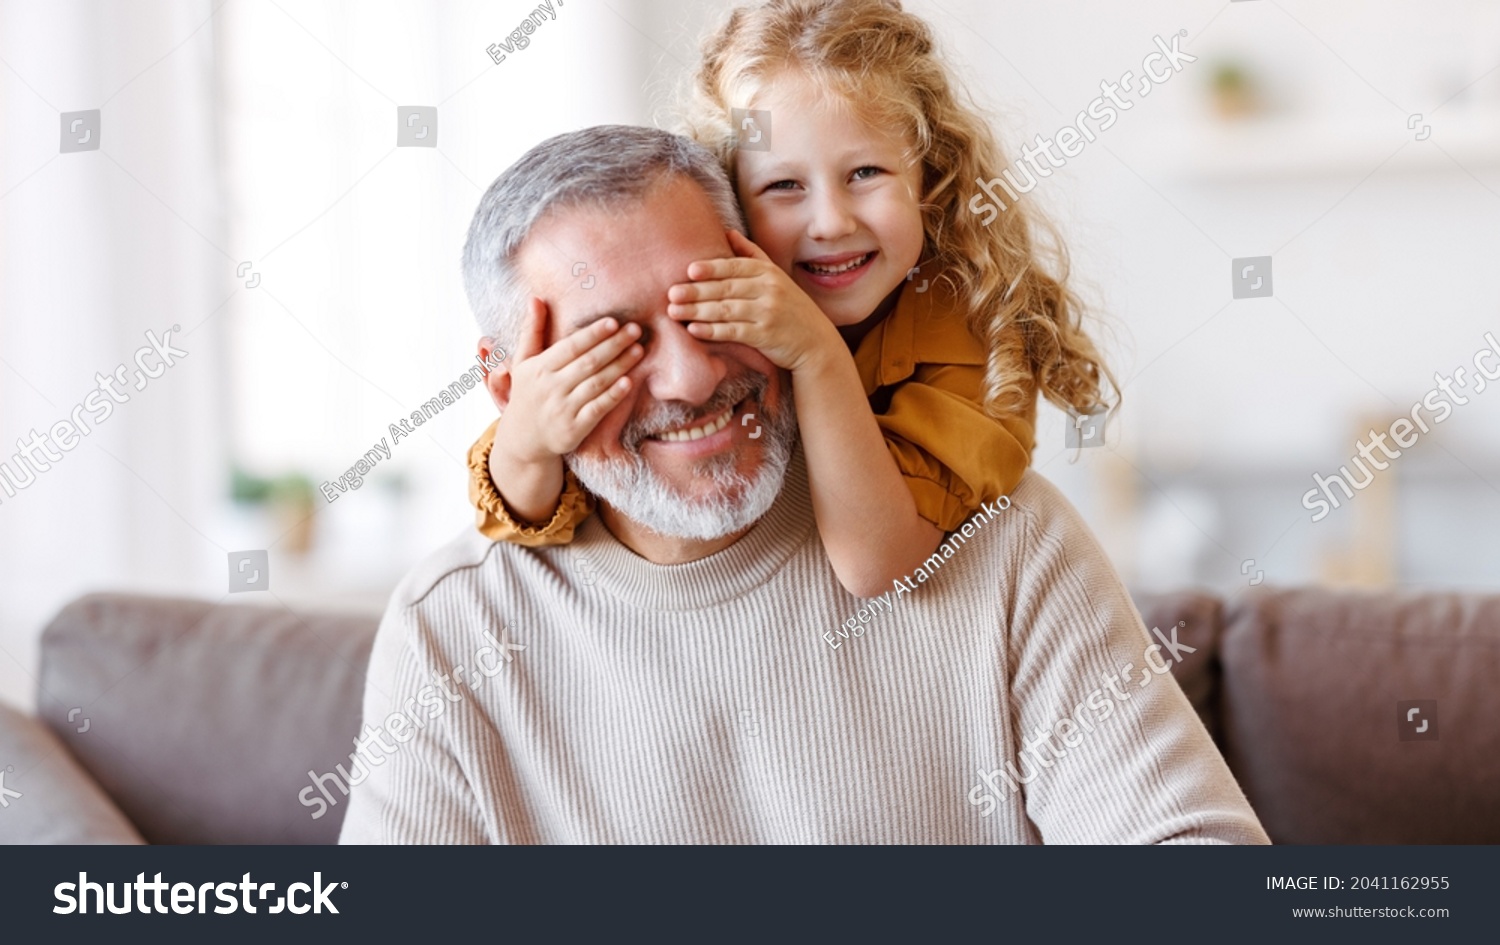 Cute little girl covering eyes with hands of her smiling senior grandfather while playing and having fun together at home, small happy child spending time with positive active grandpa in living room #2041162955